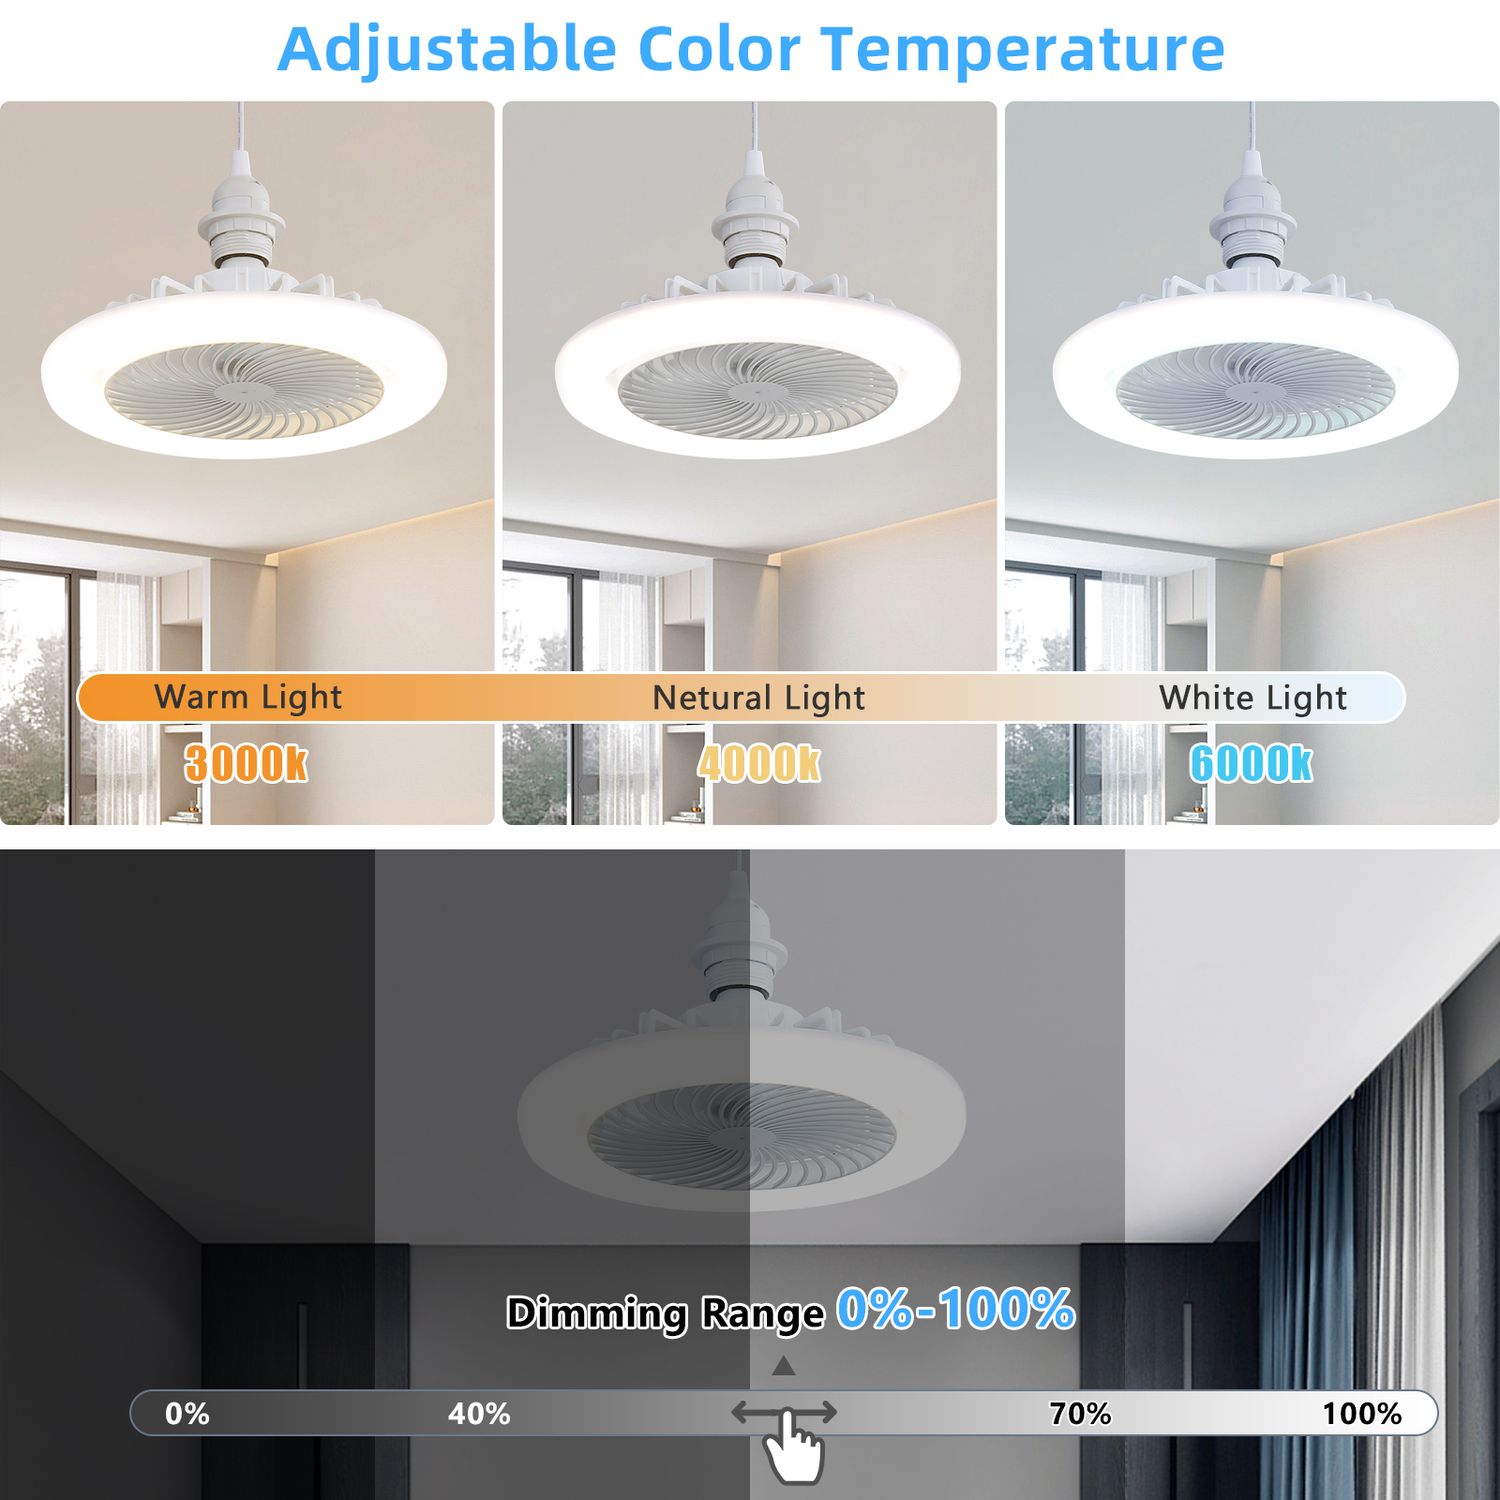 Adjistable color temperature of Sofucor 10“ Socket Ceiling Fan with Light